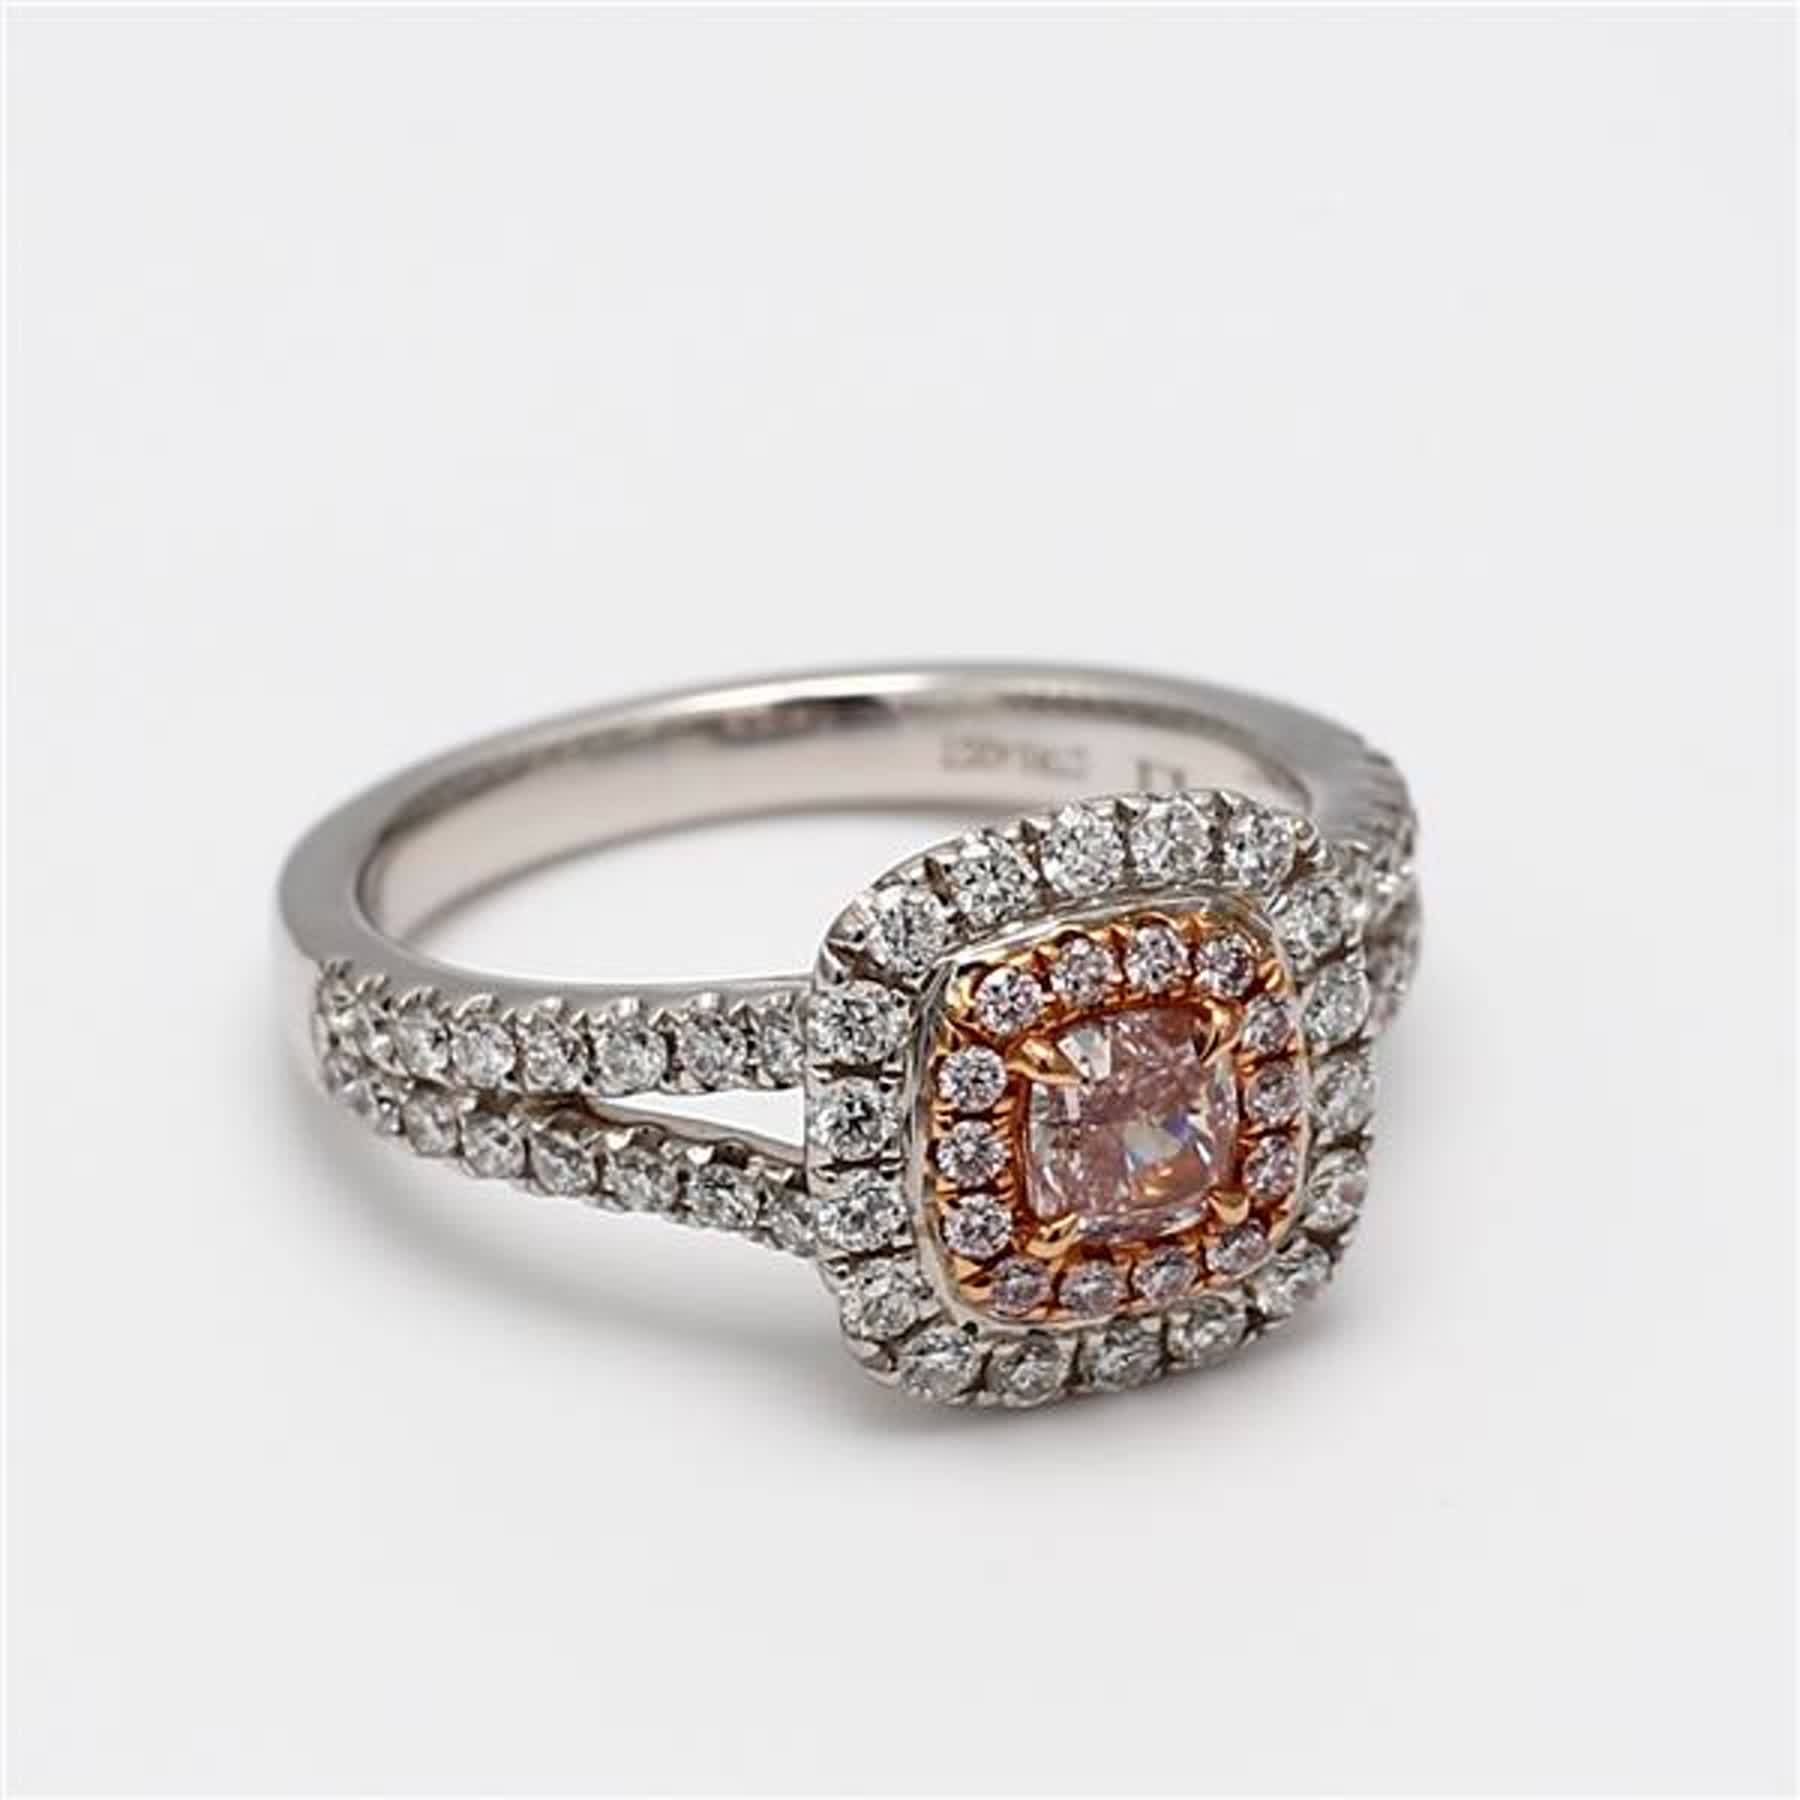 GIA Certified Natural Pink Cushion and White Diamond 1.15 Carat TW Gold Ring